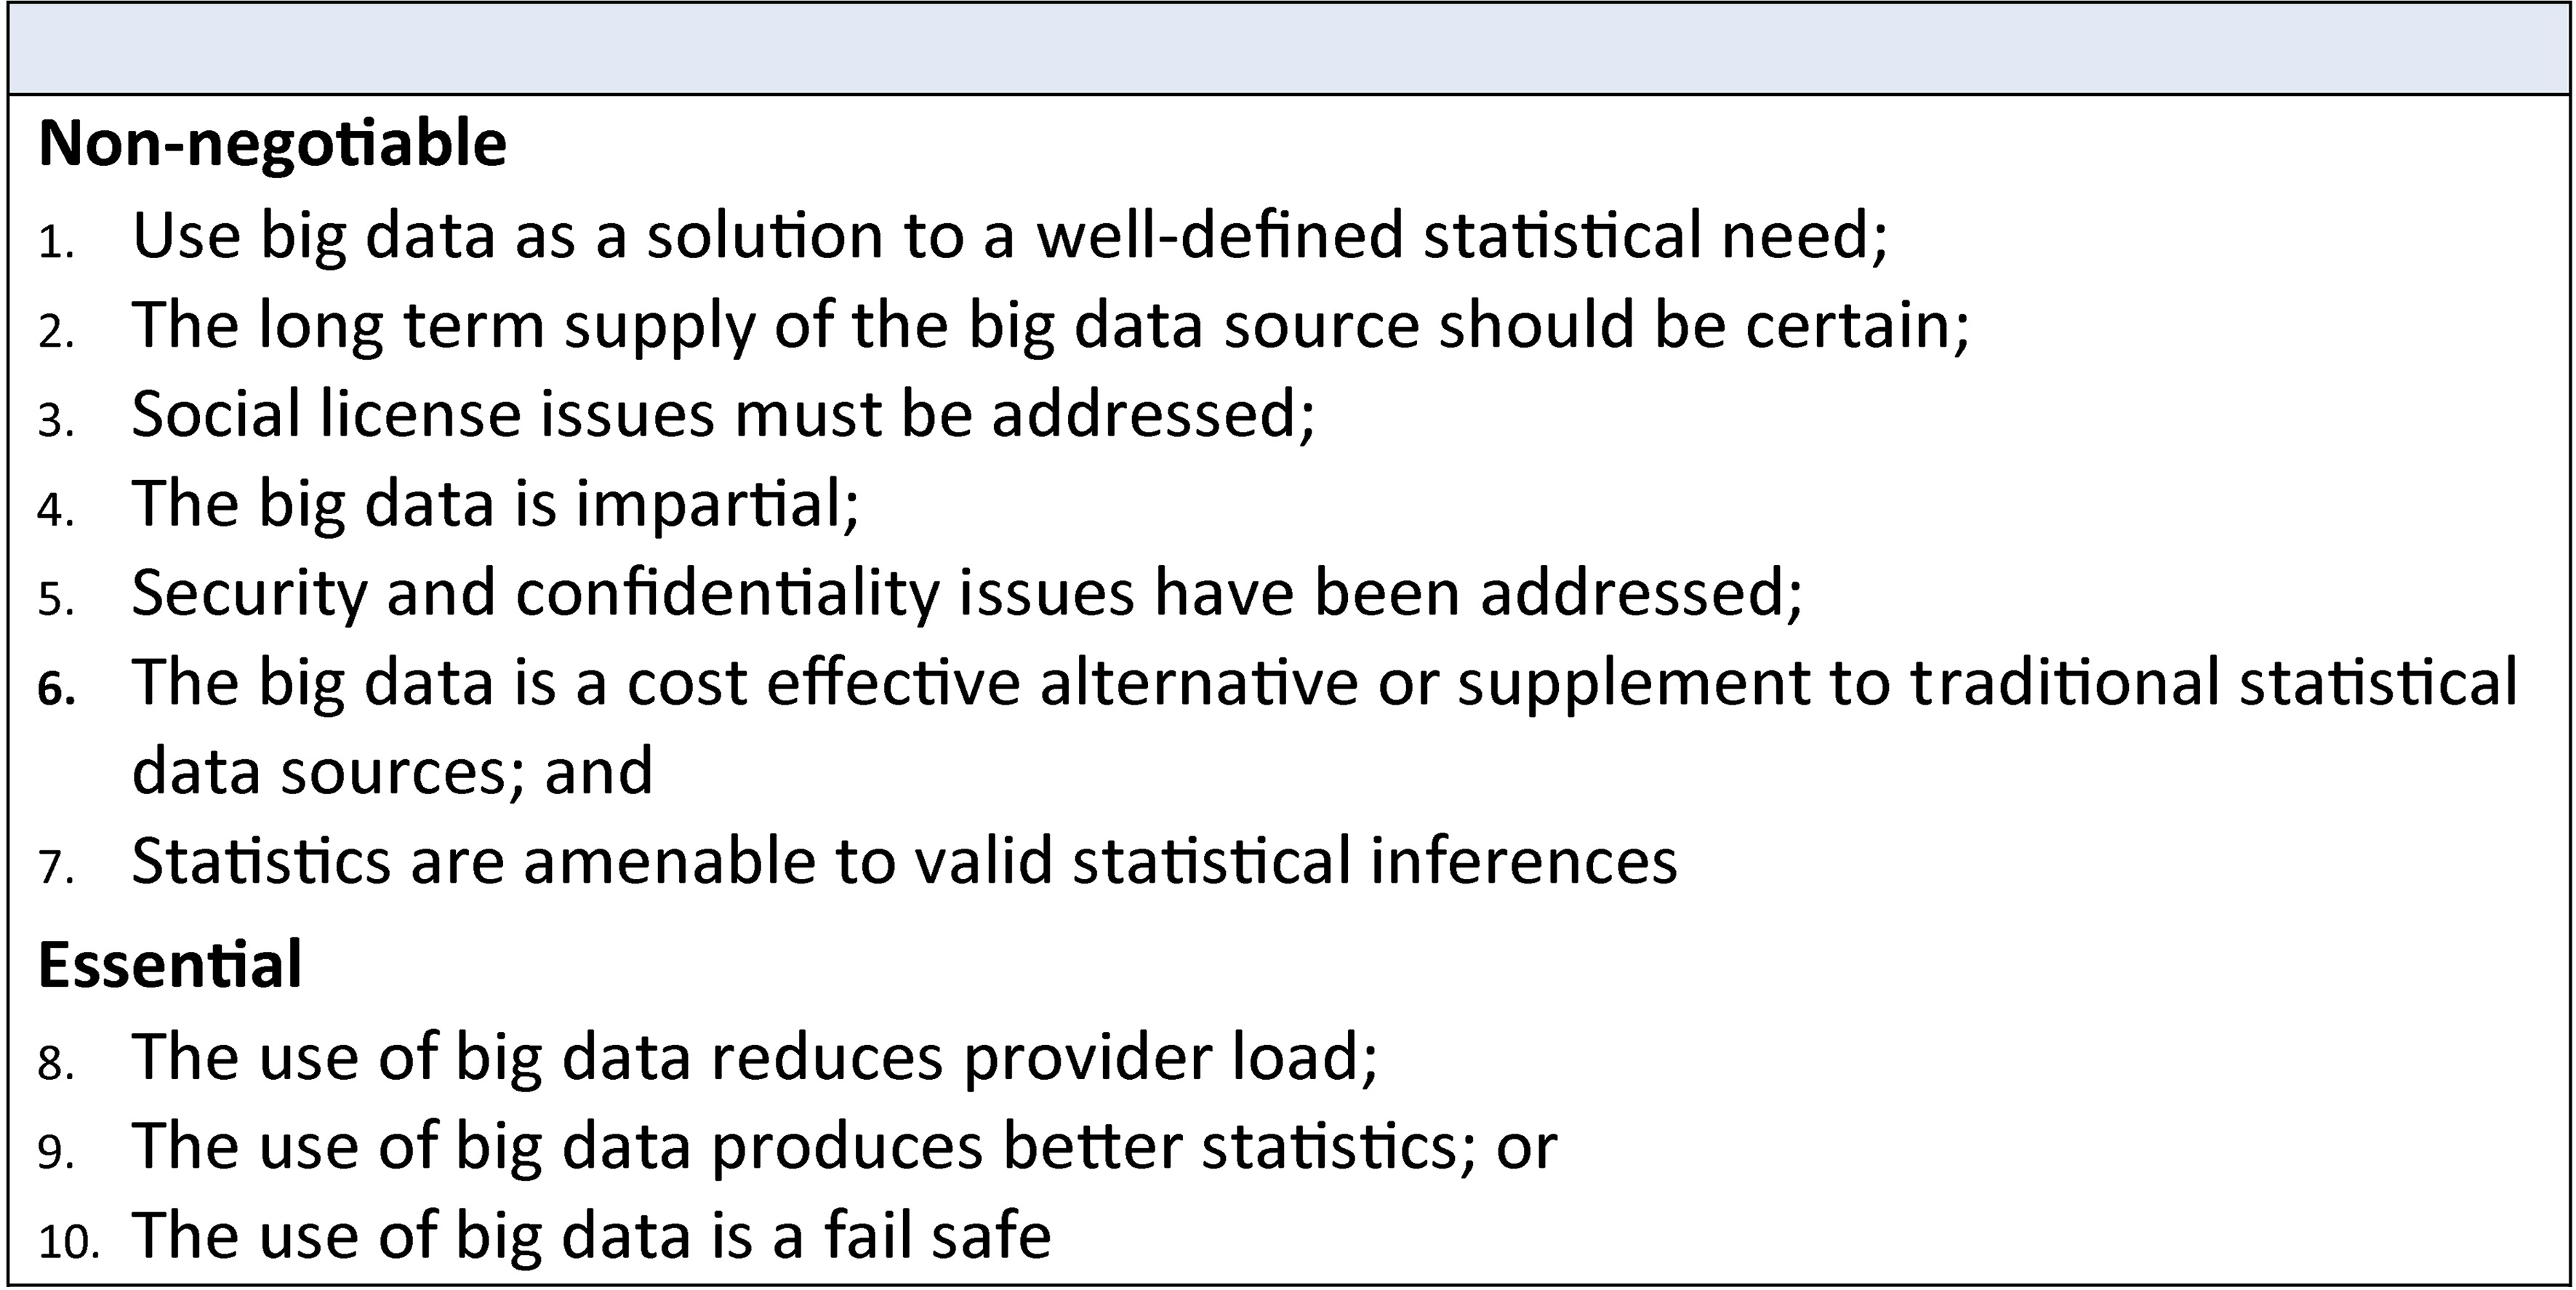 When could big data be used for official statistics?